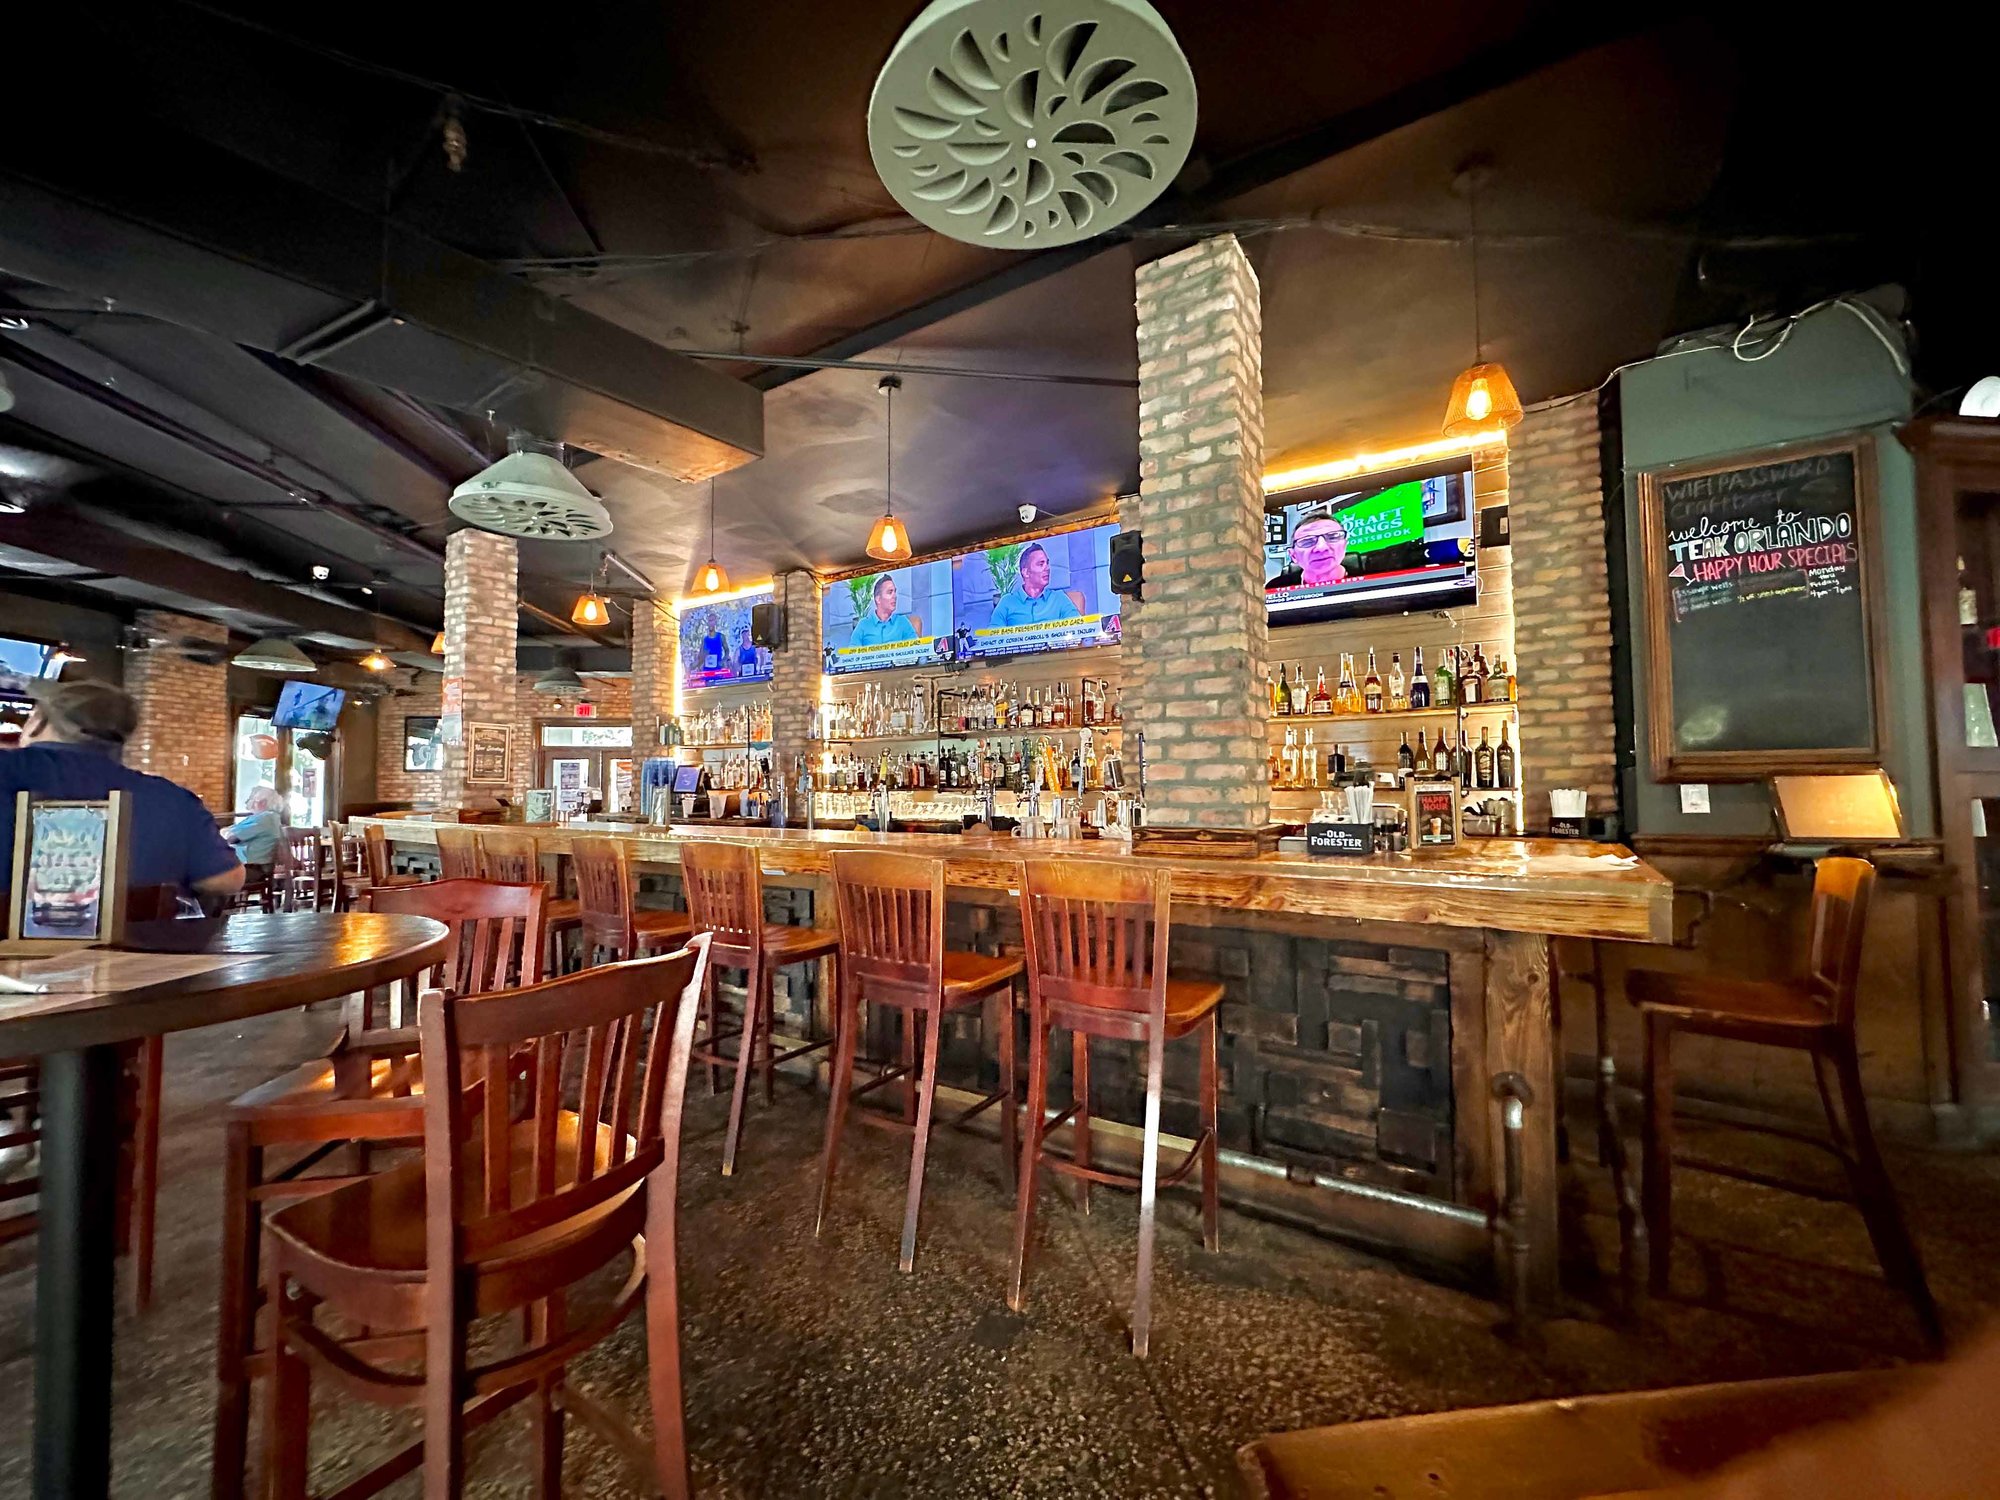 high stools with bar filled with alcohol bottles and brick columns